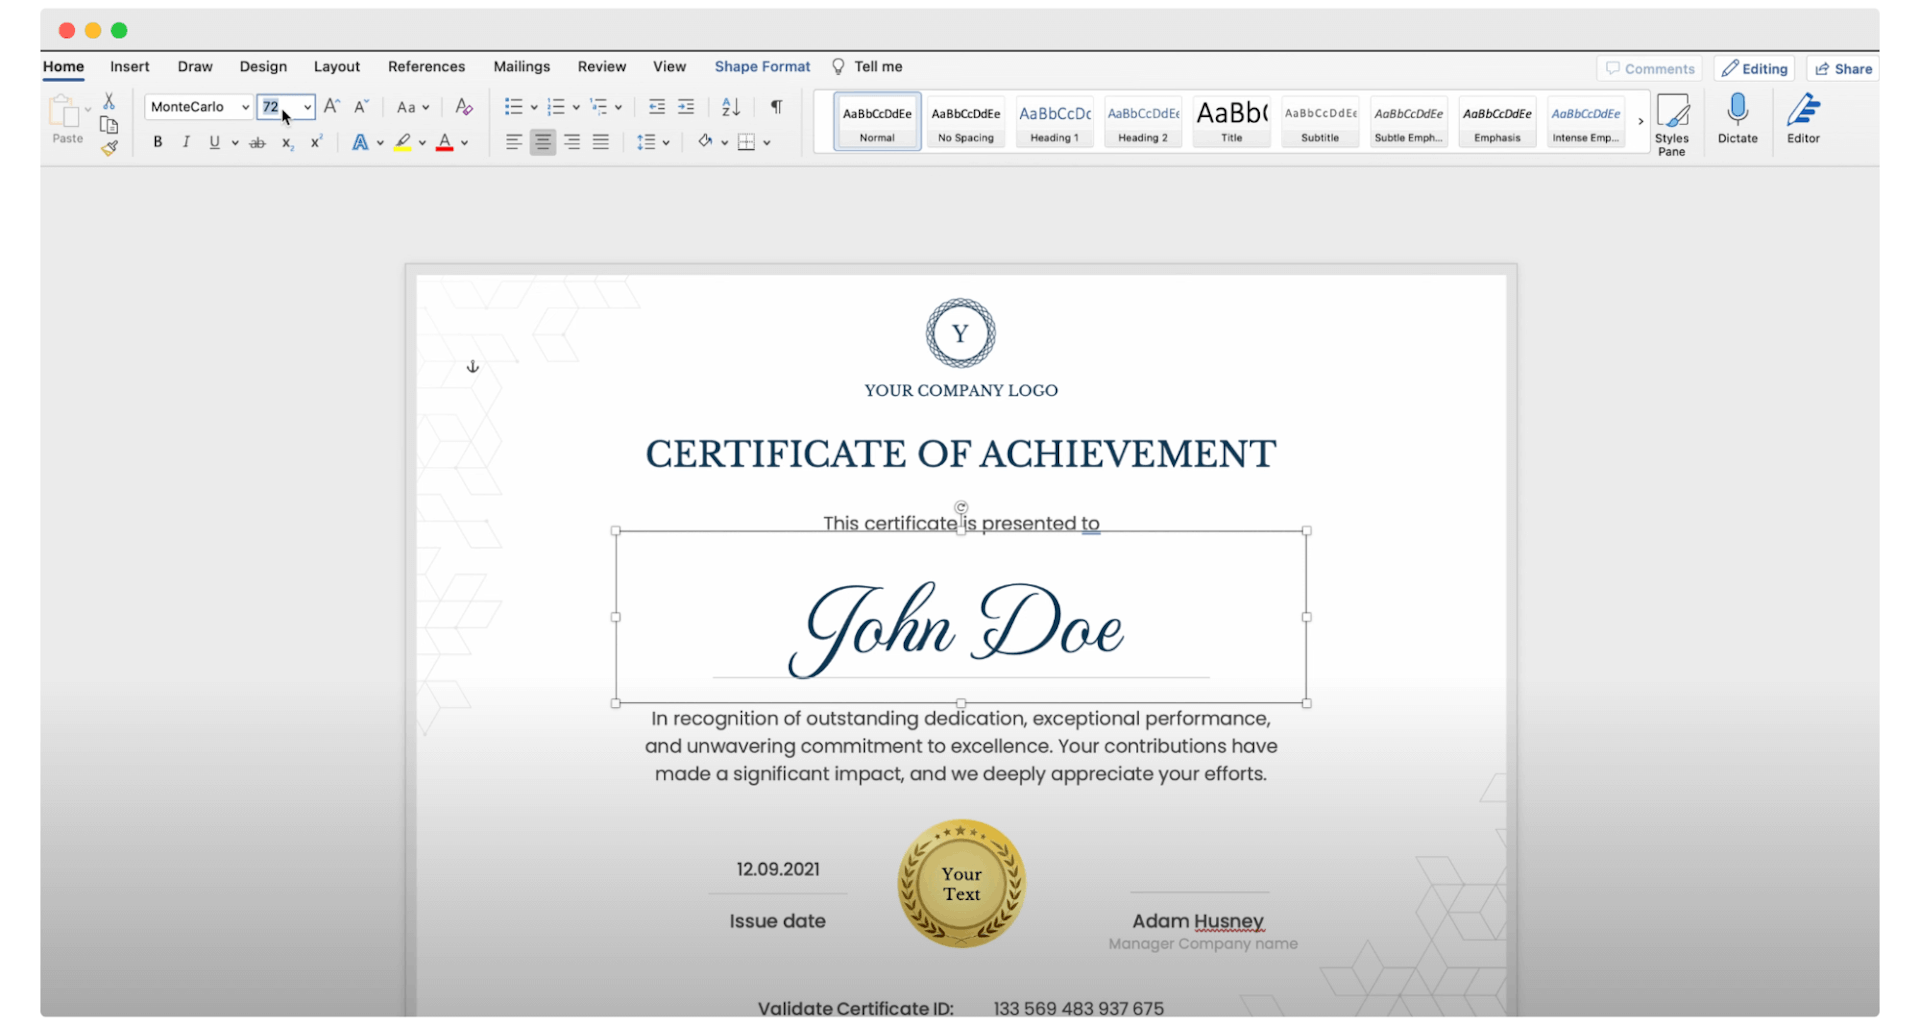 Changing the recipient's name on the certificate in Word.